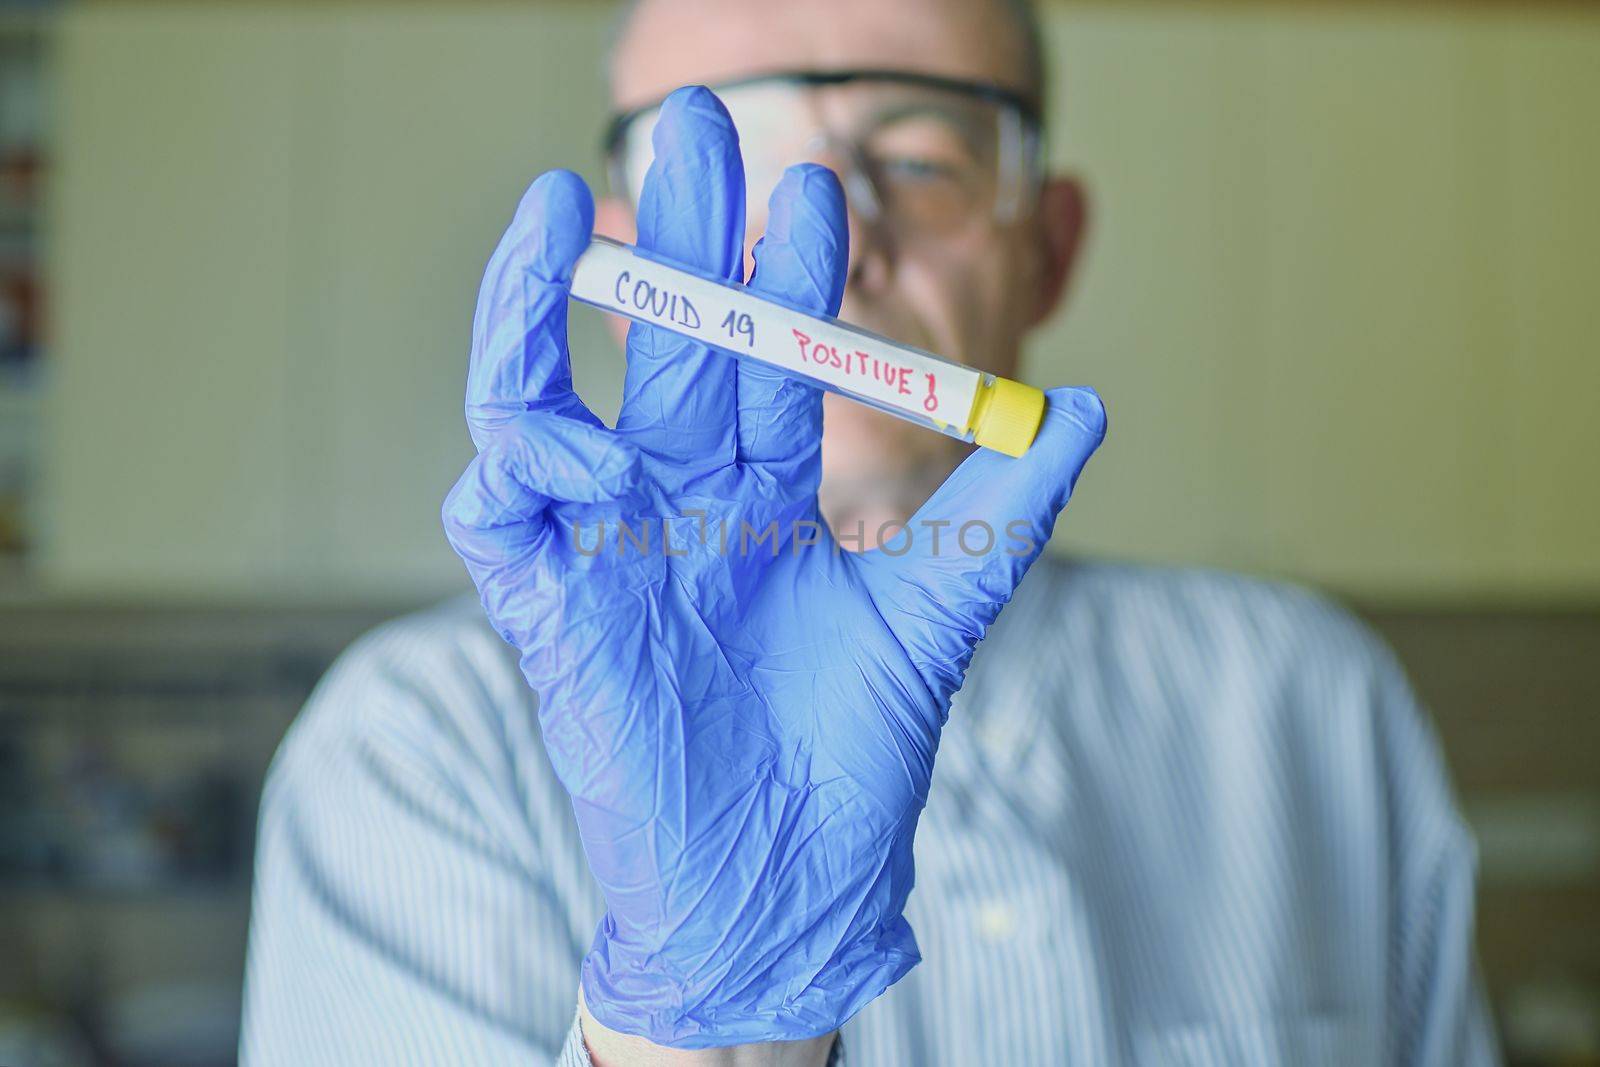 The sample of Covid 19 in the test tube. Doctor - epidemiologist holding thesample tube with sample of coronavirus